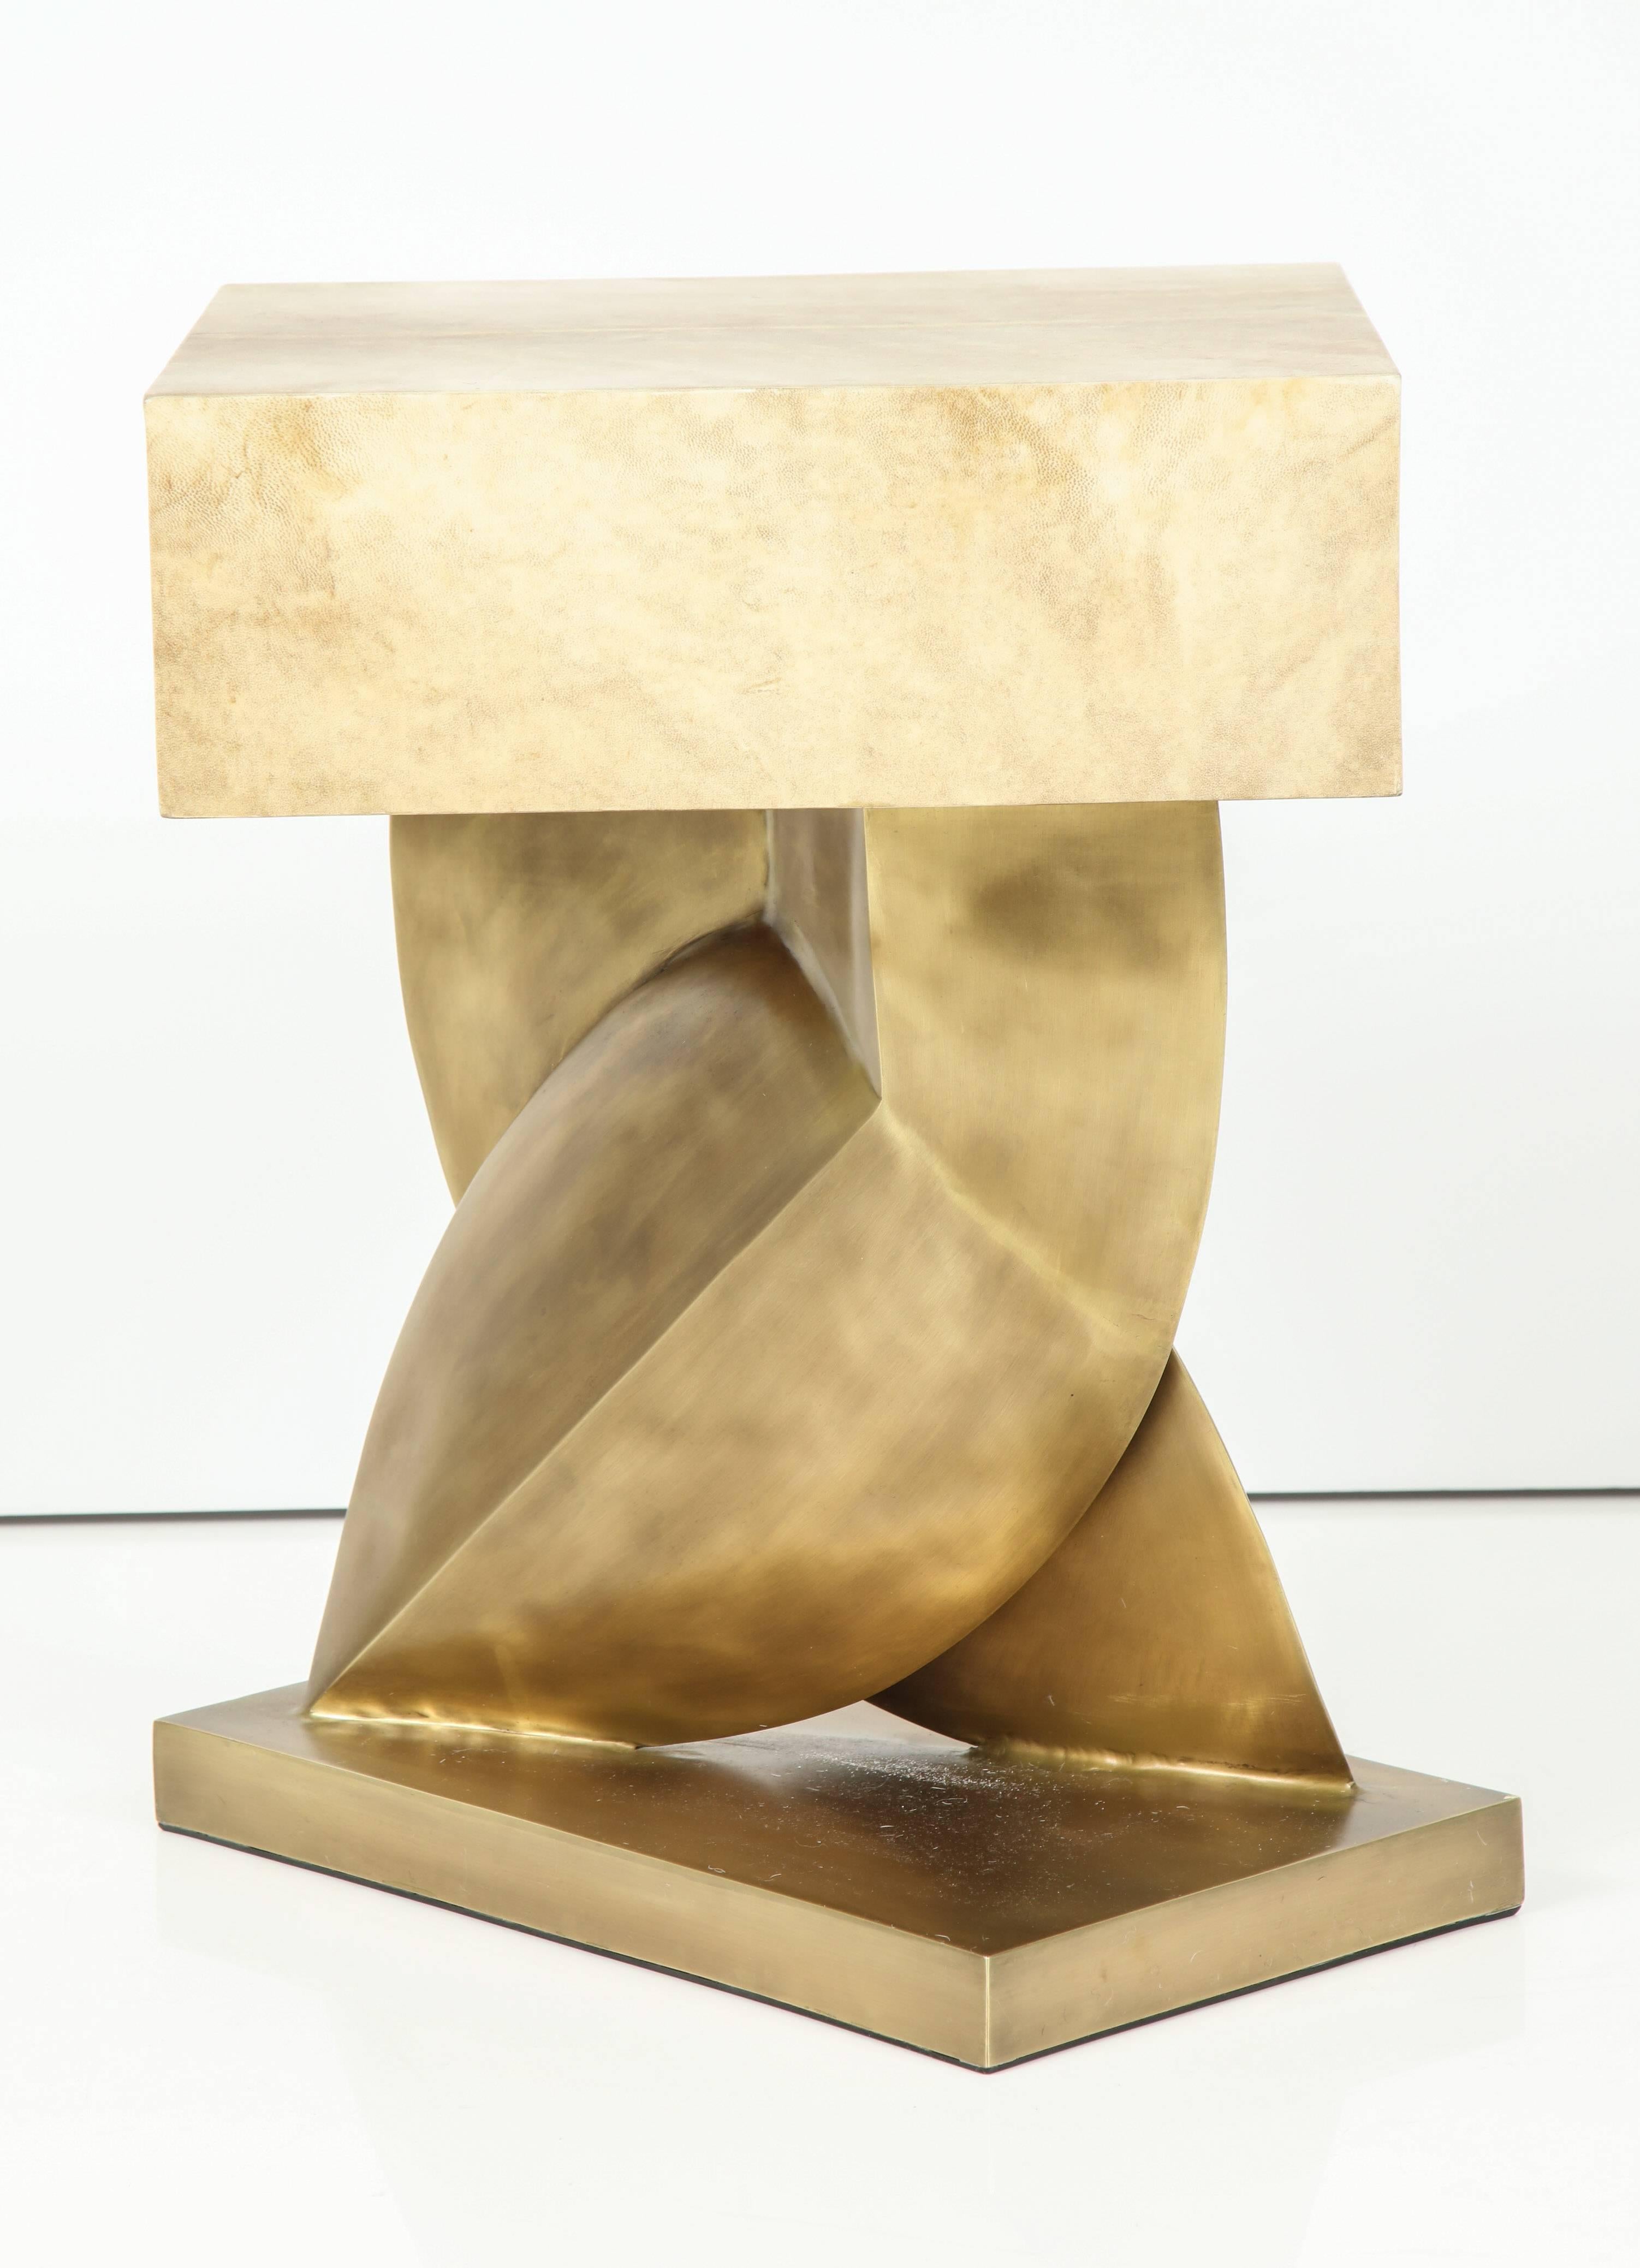 Tan goatskin parchment side table with a fantastic bronze base. Designed in France.
We have the table in stock.
 